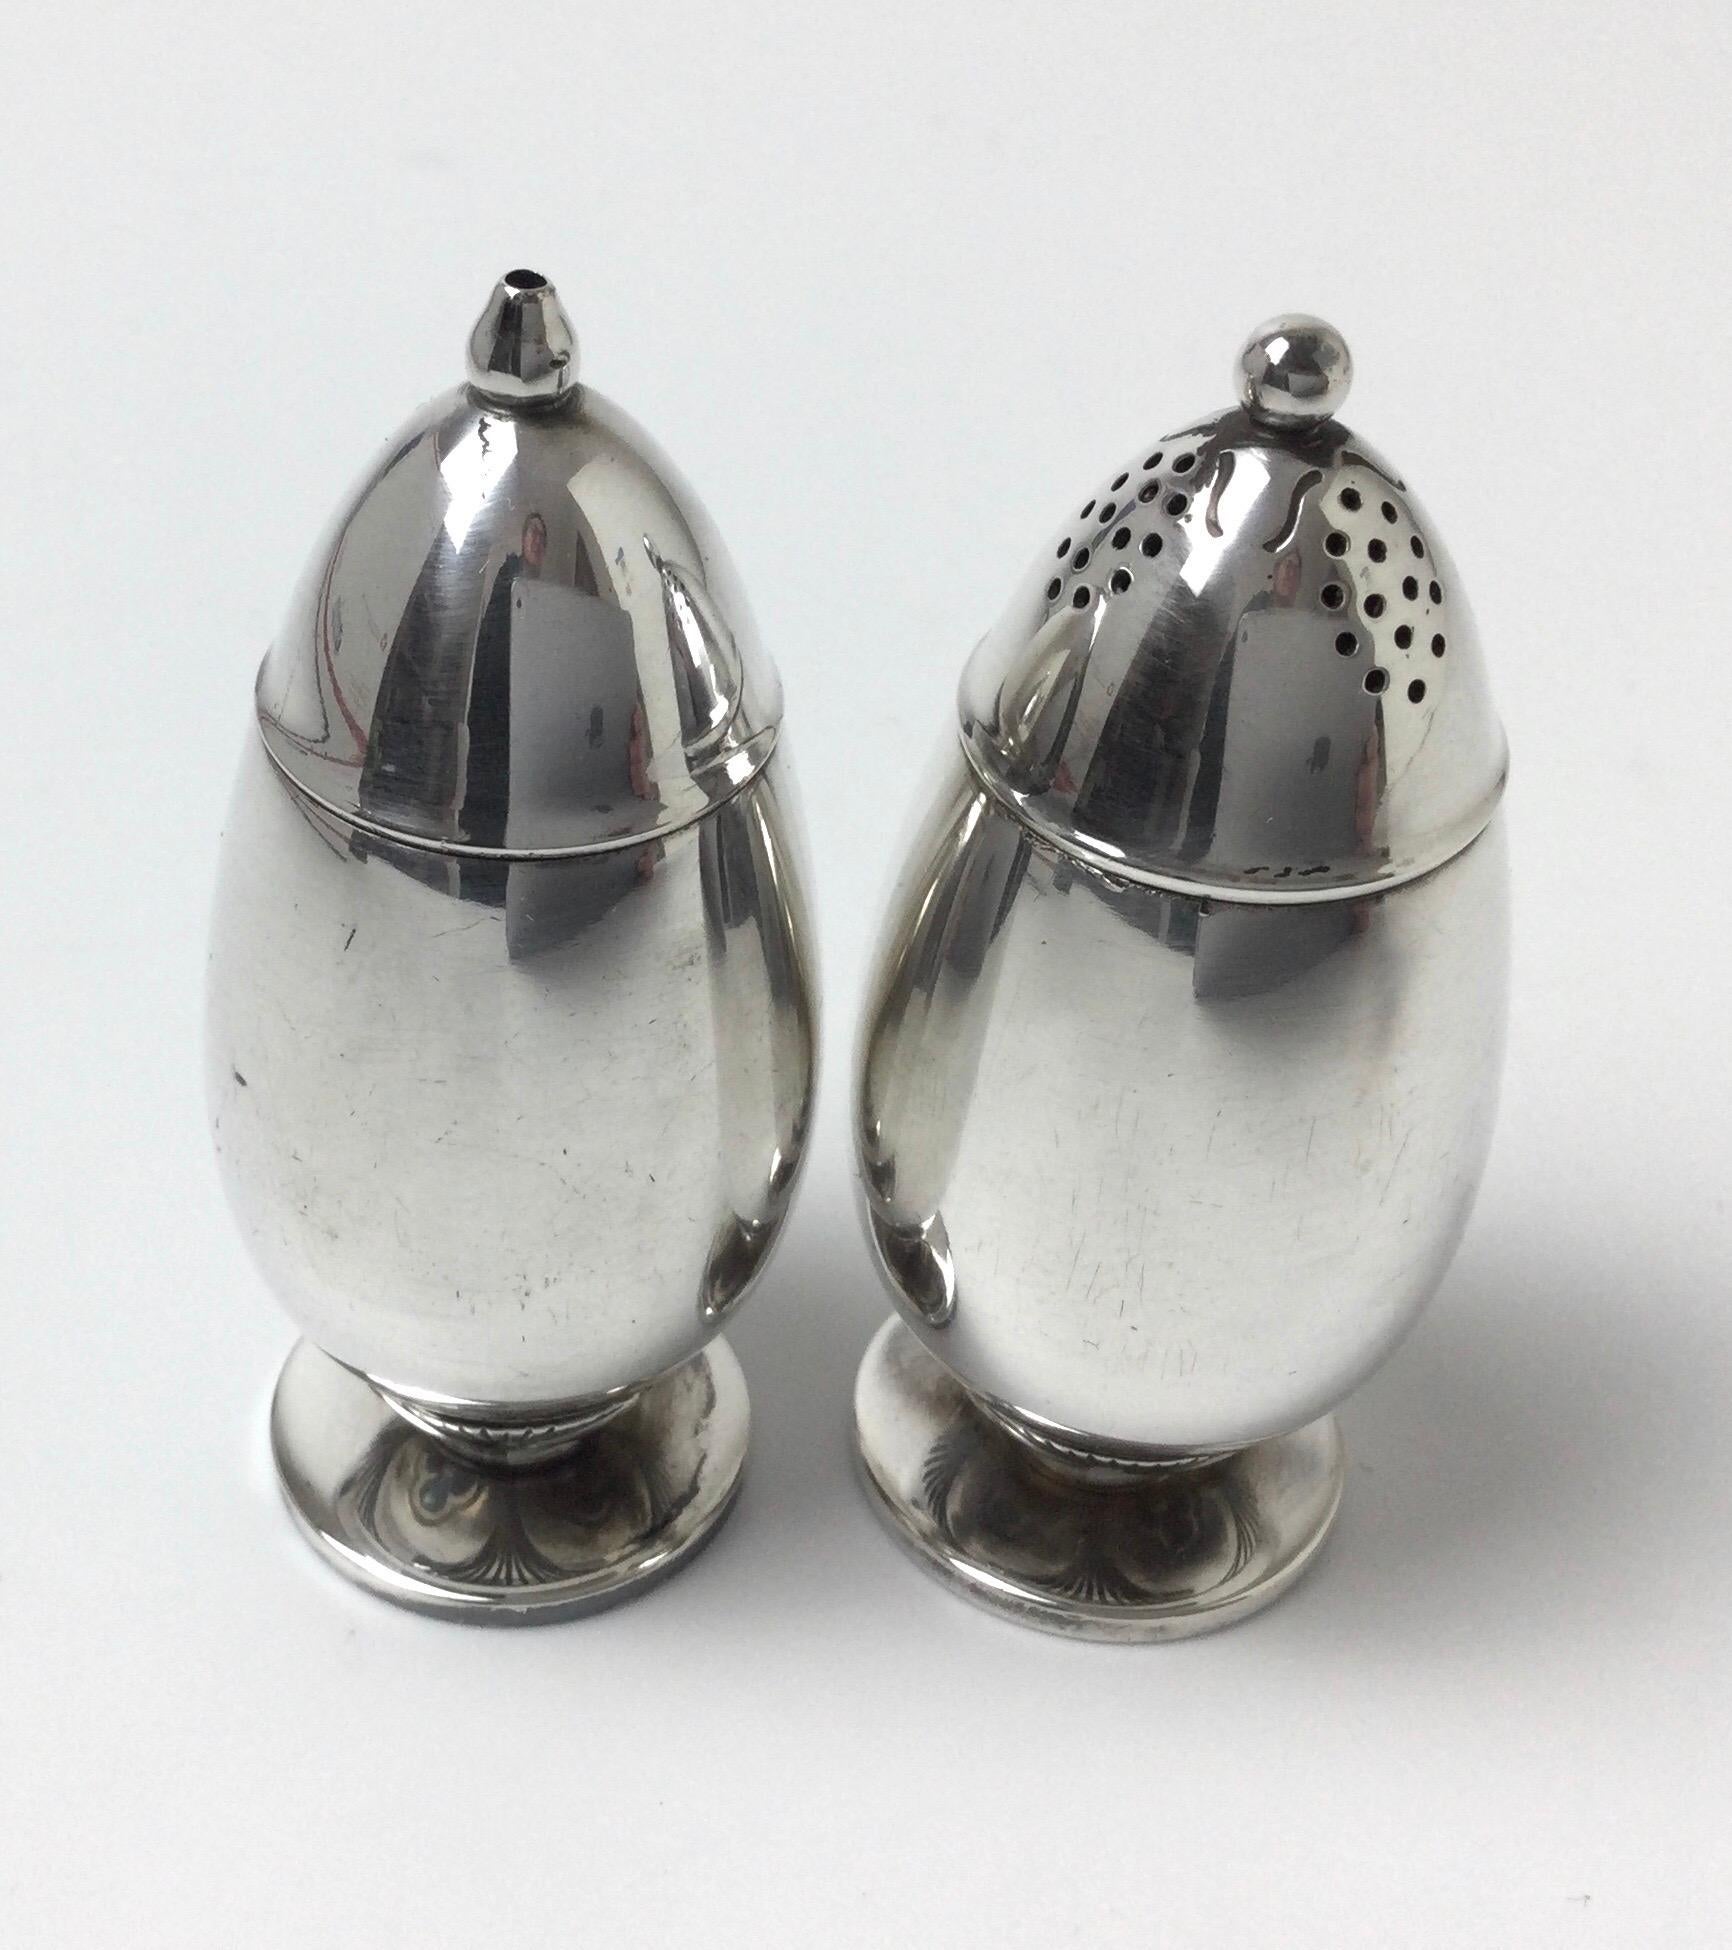 Georg Jensen sterling silver salt and pepper shakers 2-piece set. The pieces are marked with 629A. Signed Dessin they measure: 2 7/8 by 1 1/4